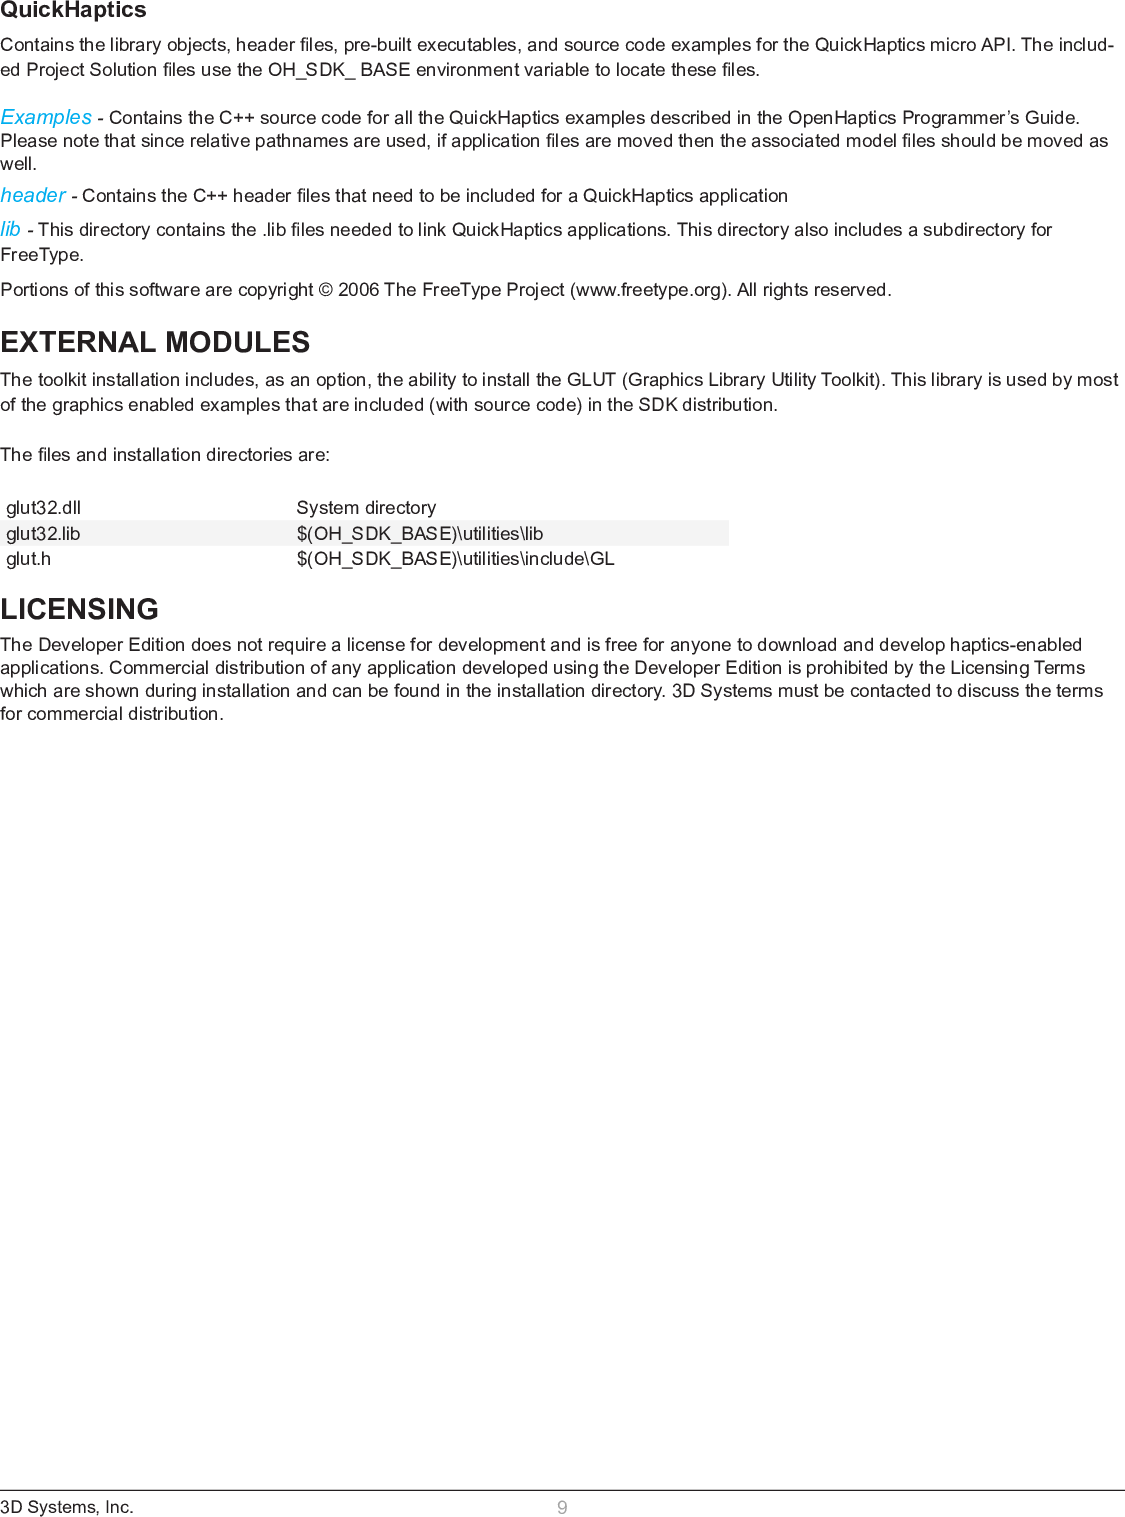 Page 10 of 10 - Open Haptics Windows Install Guide